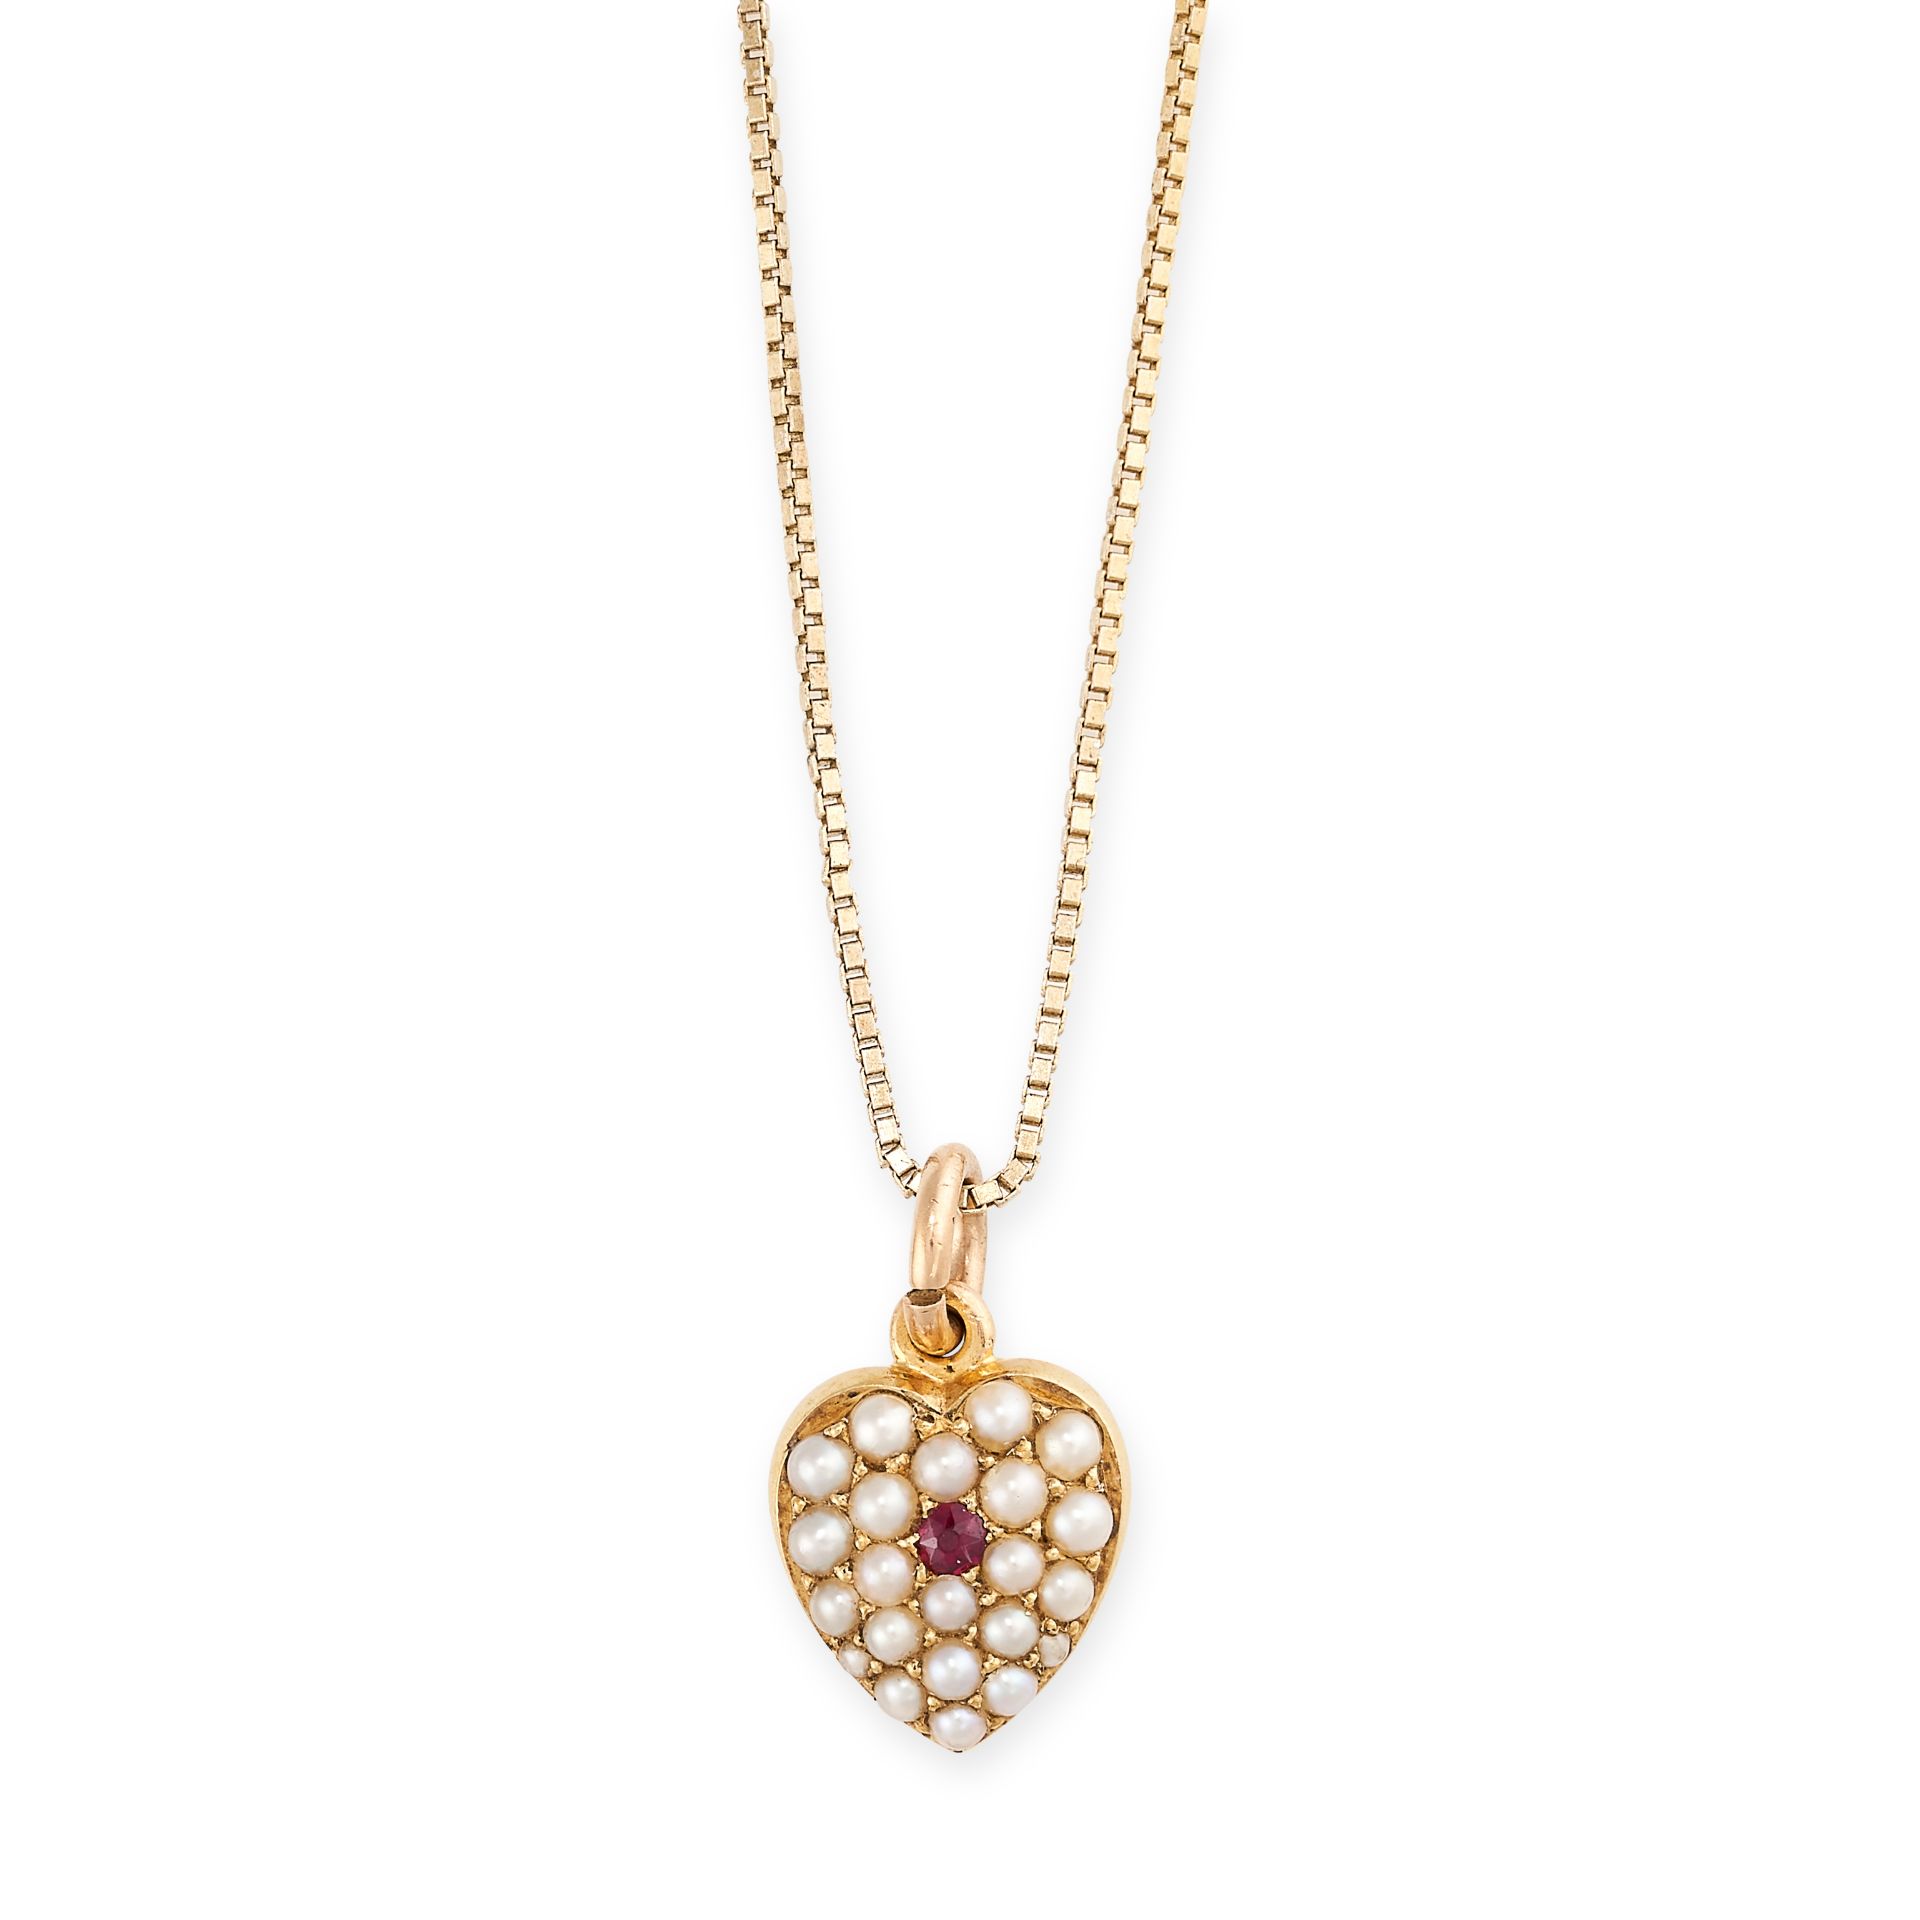 A RUBY AND PEARL HEART PENDANT AND CHAIN in 18ct yellow gold, the pendant set with a round cut